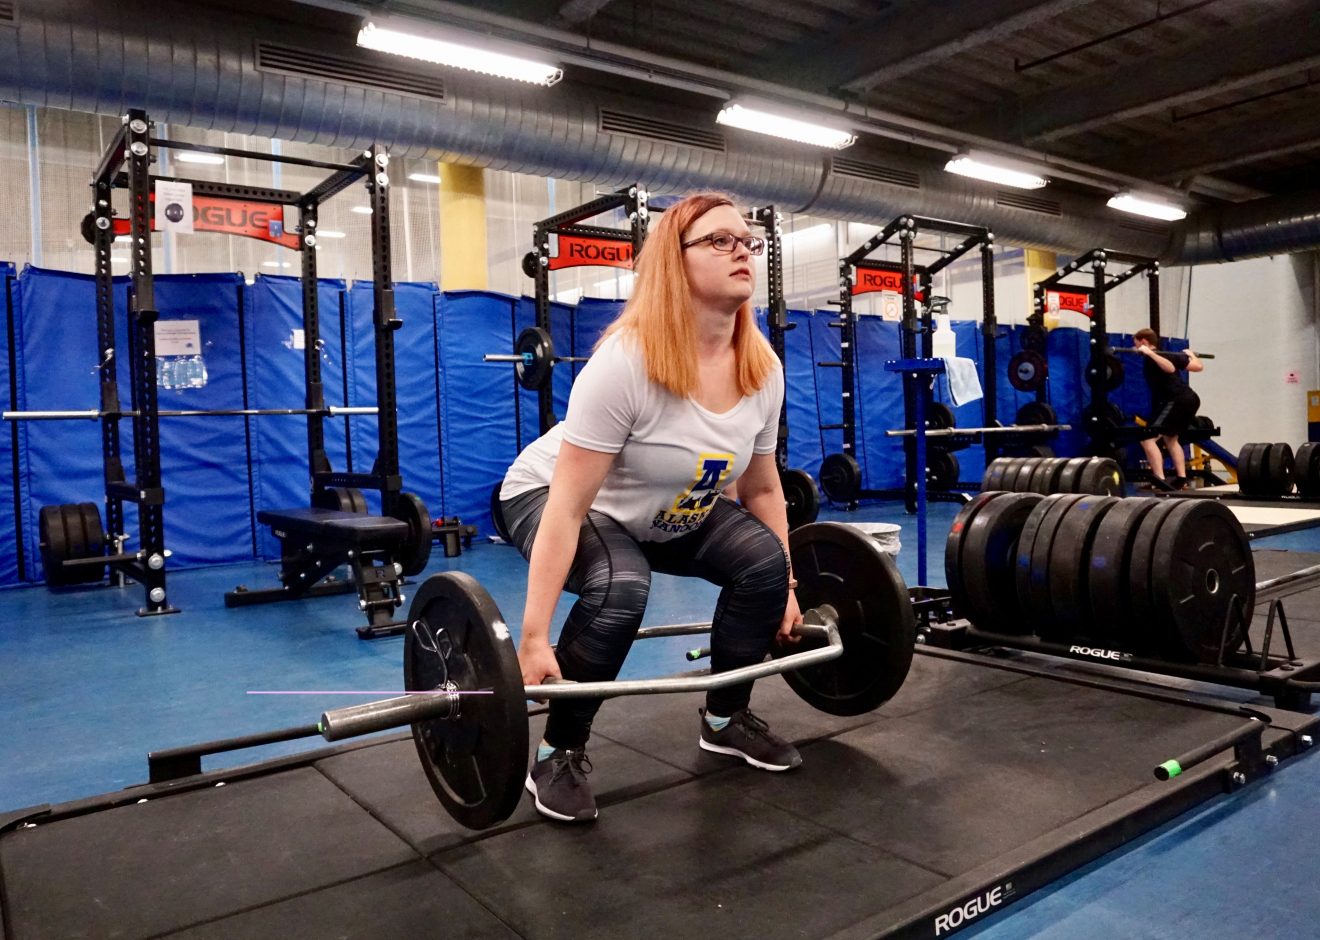 A woman lifts weights in a weight room.